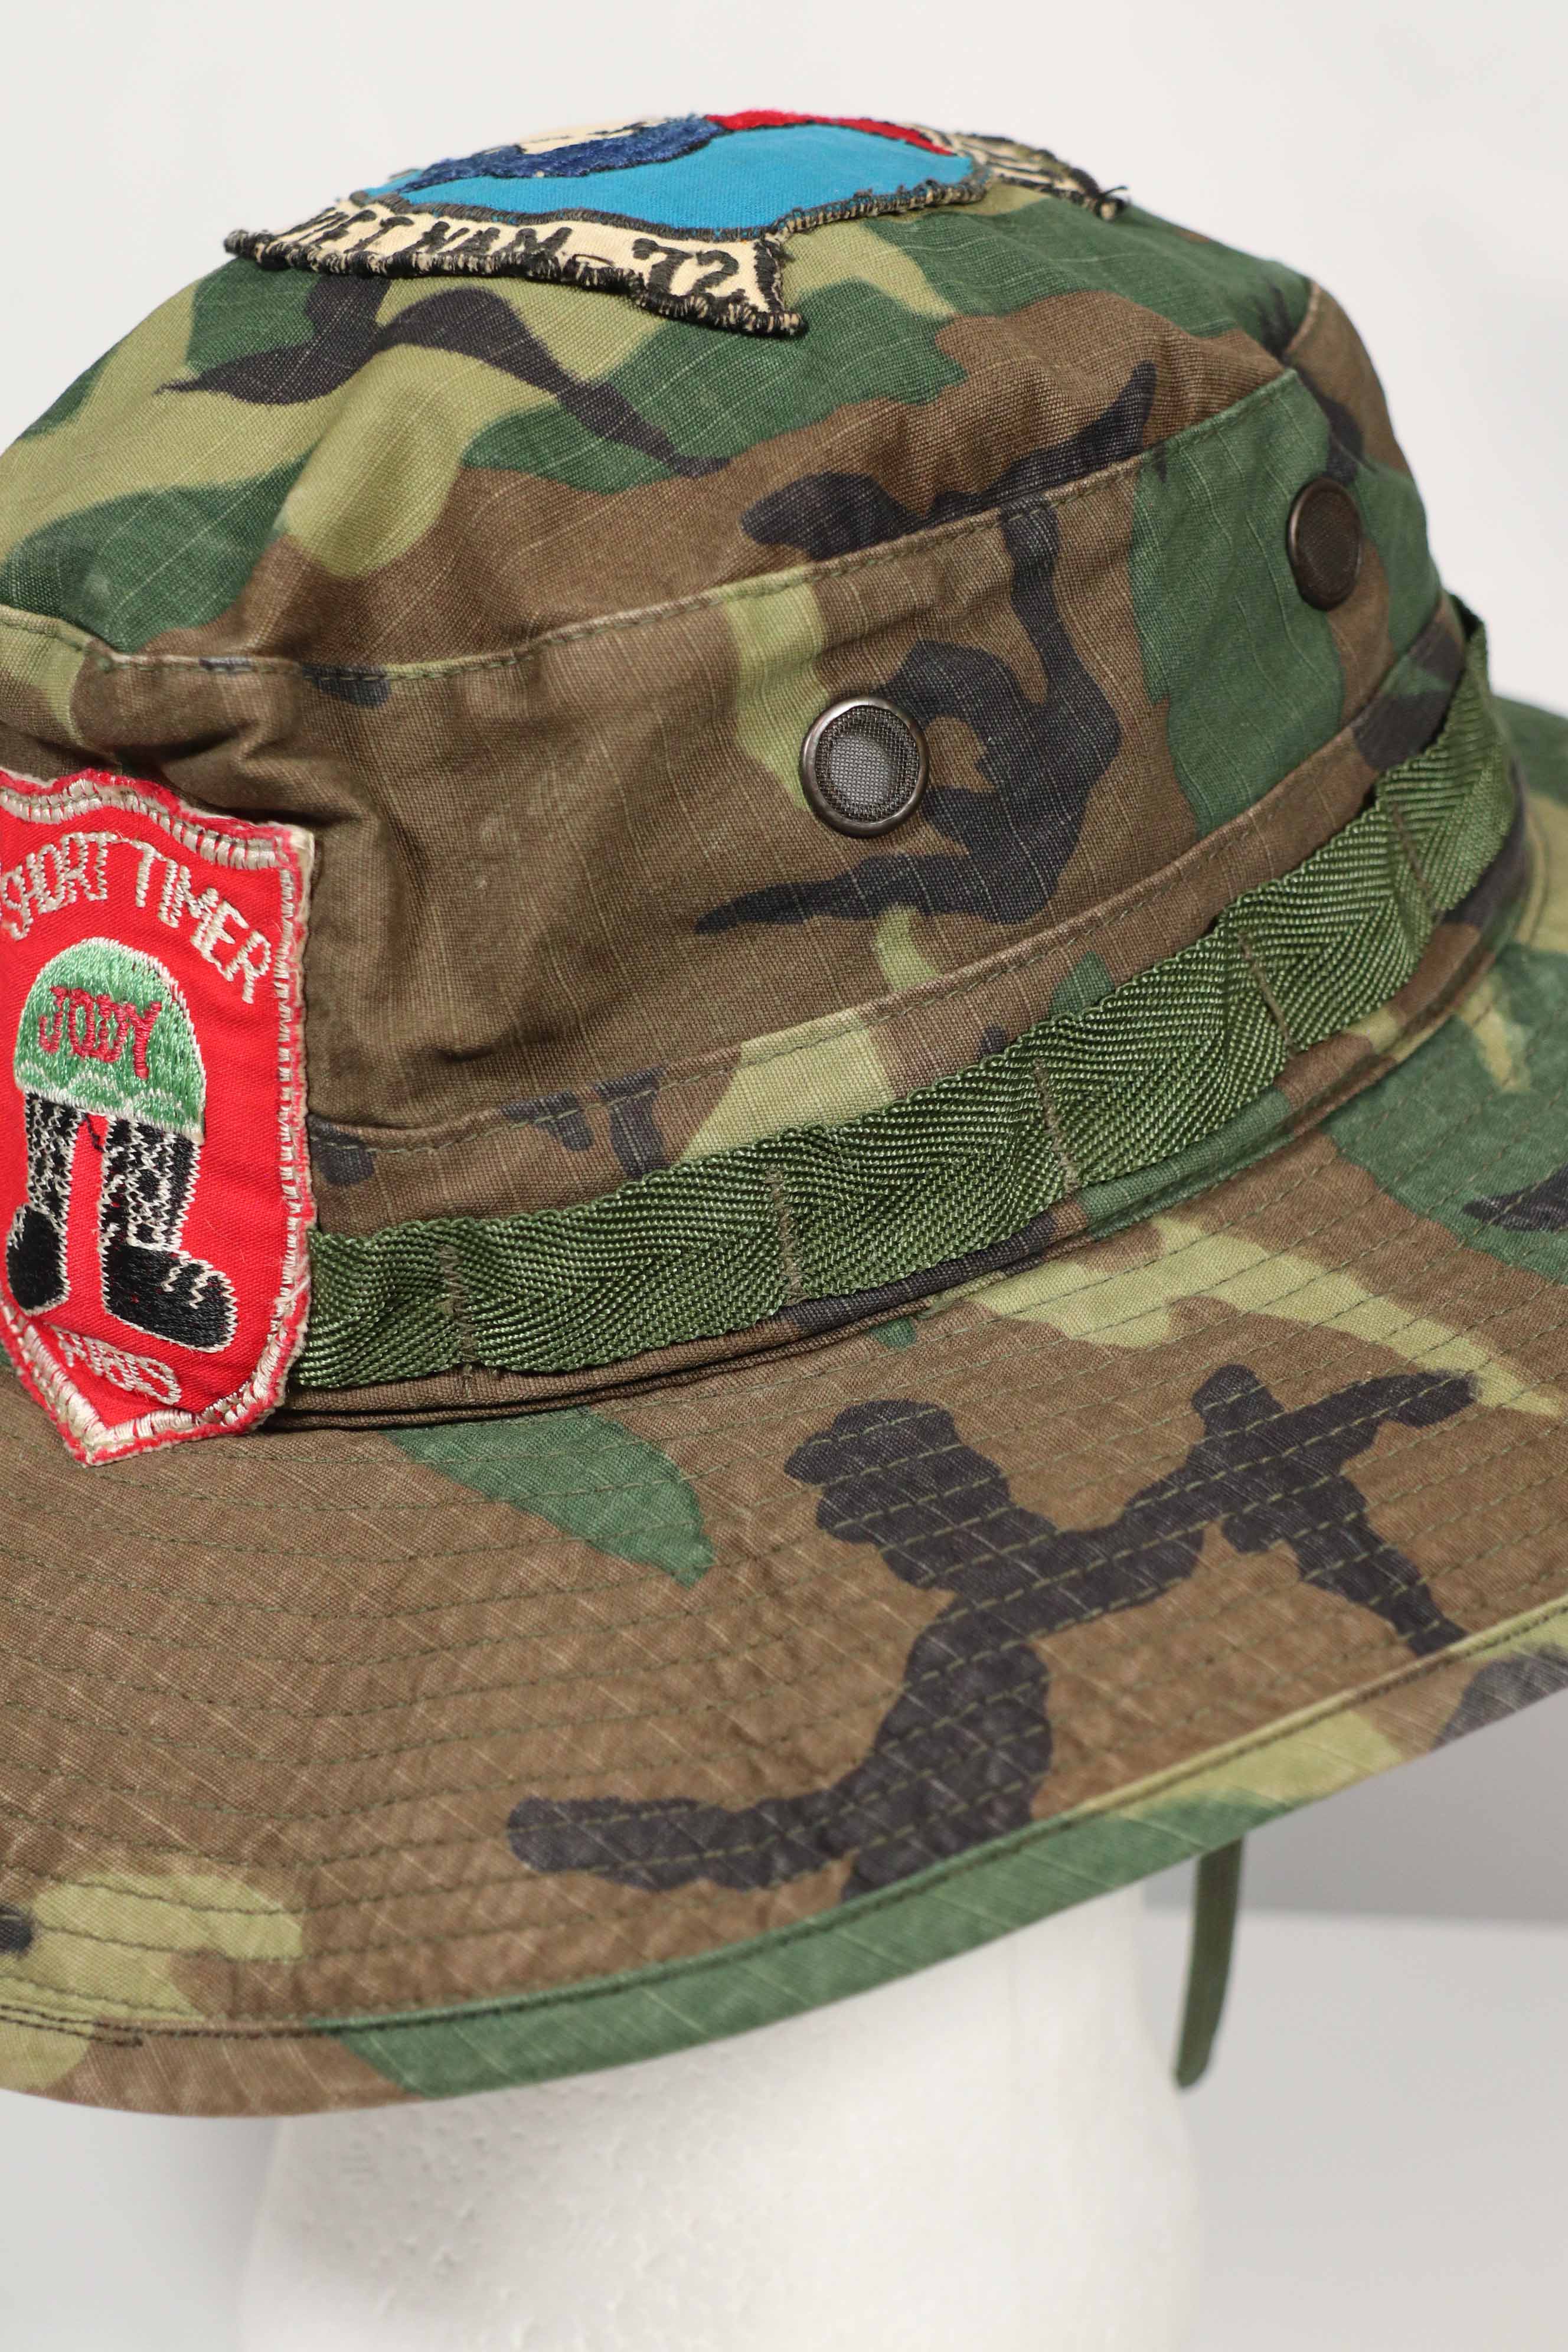 Real ERDL Government Issue Boonei Hat US Army K-9 Military Dog with Locally Made Patch & Embroidery